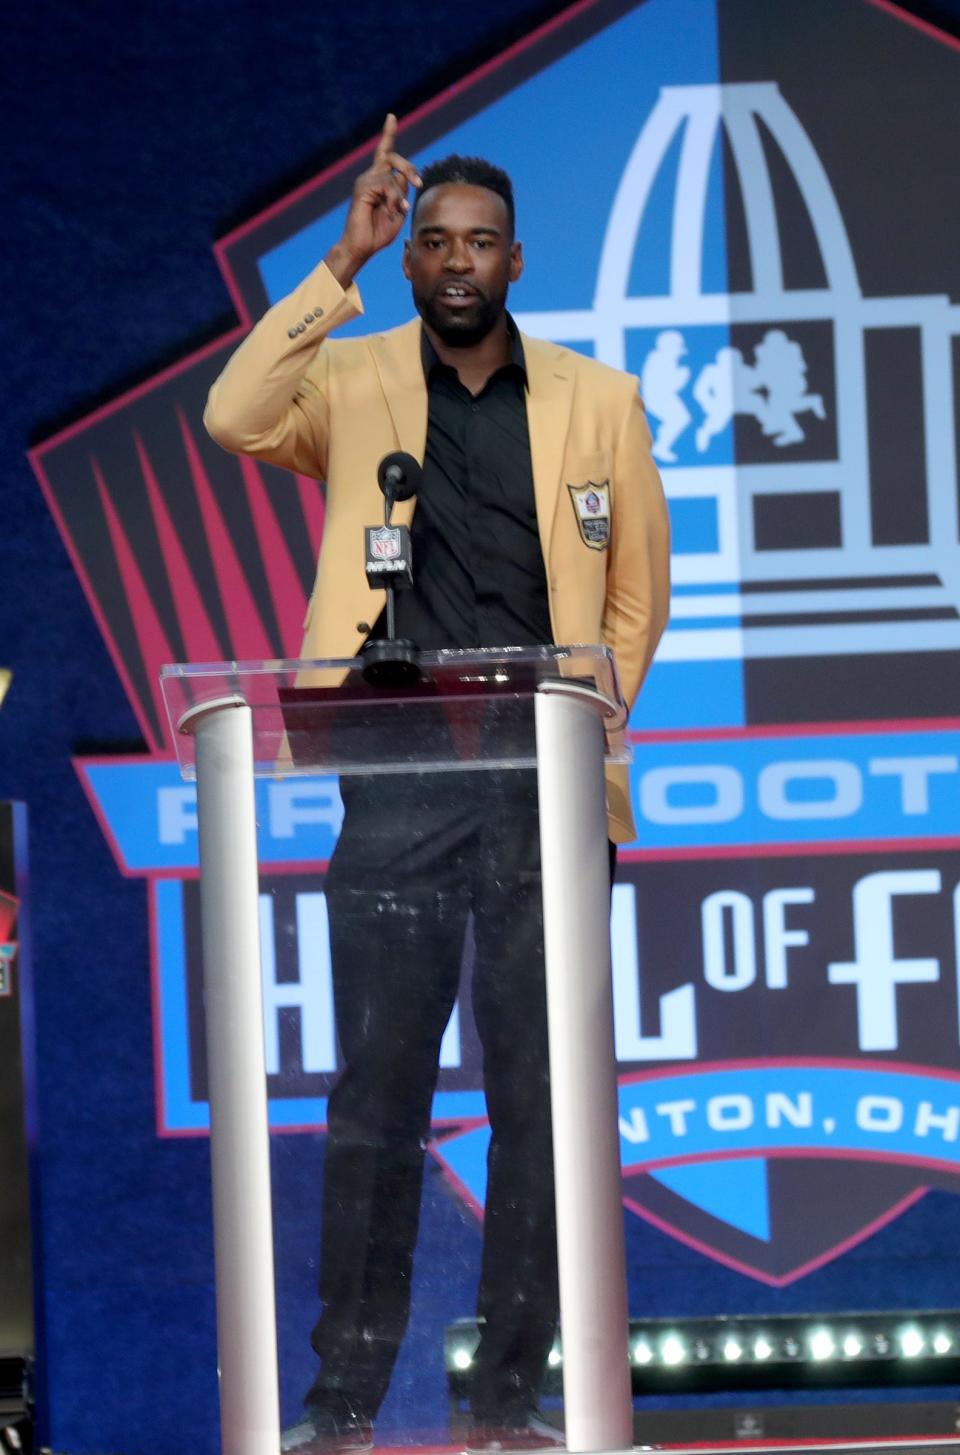 Former Detroit Lion Calvin Johnson gives his speech during the Pro Football Hall of Fame enshrinement ceremony Sunday, Aug. 8, 2021 at Tom Benson Hall of Fame Stadium in Canton, Ohio.